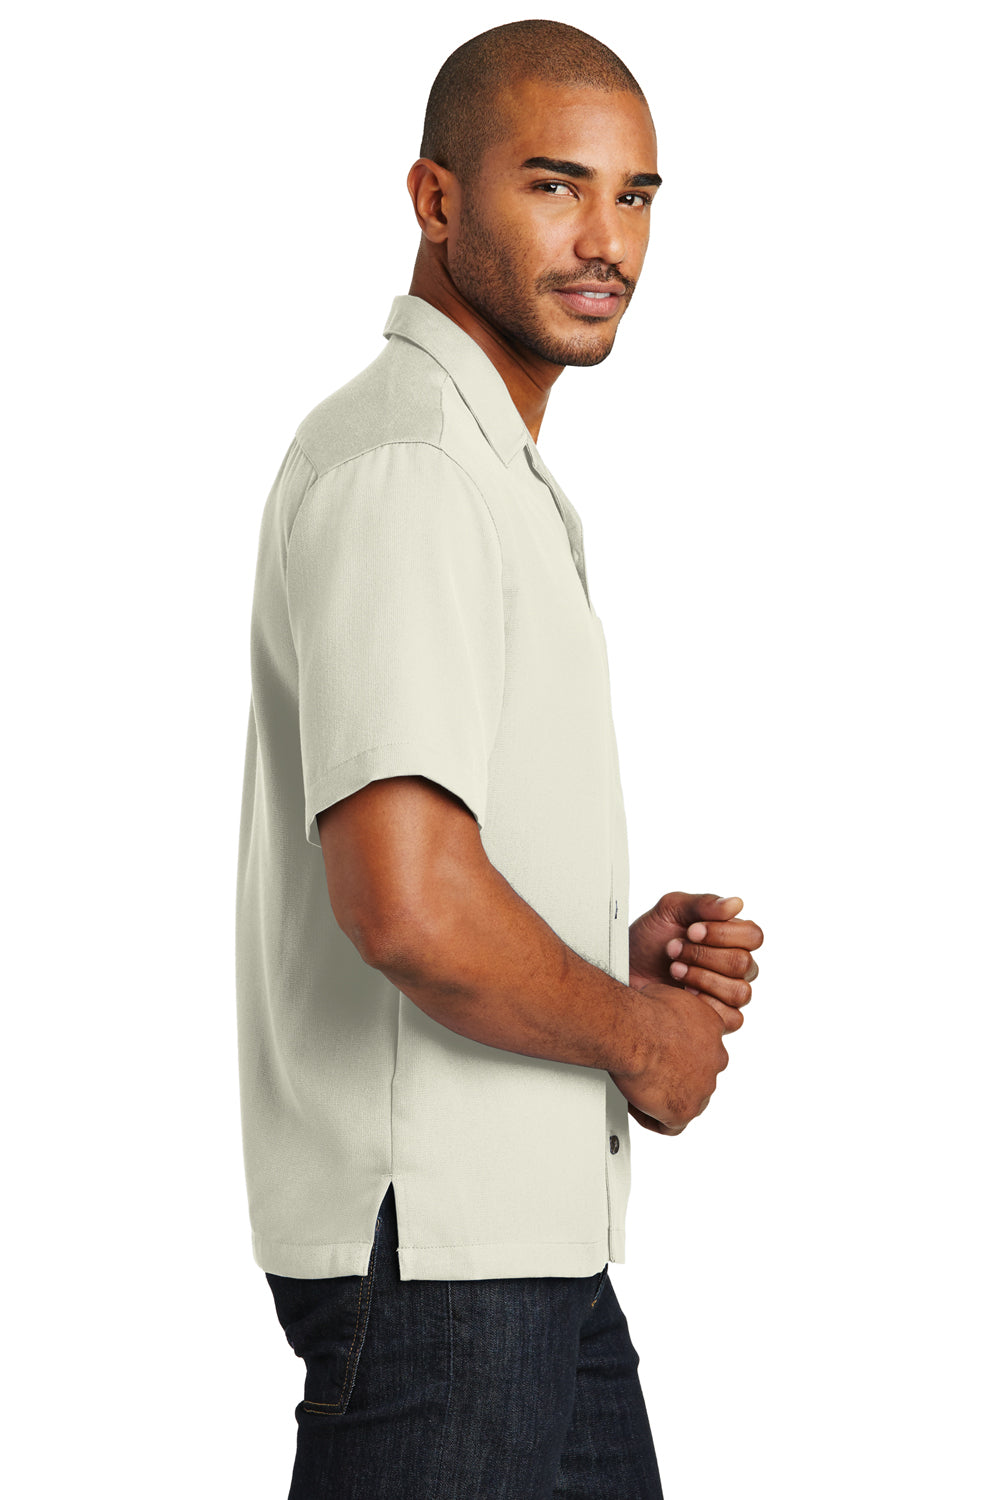 Port Authority S535 Mens Easy Care Stain Resistant Short Sleeve Button Down Camp Shirt w/ Pocket Ivory Side